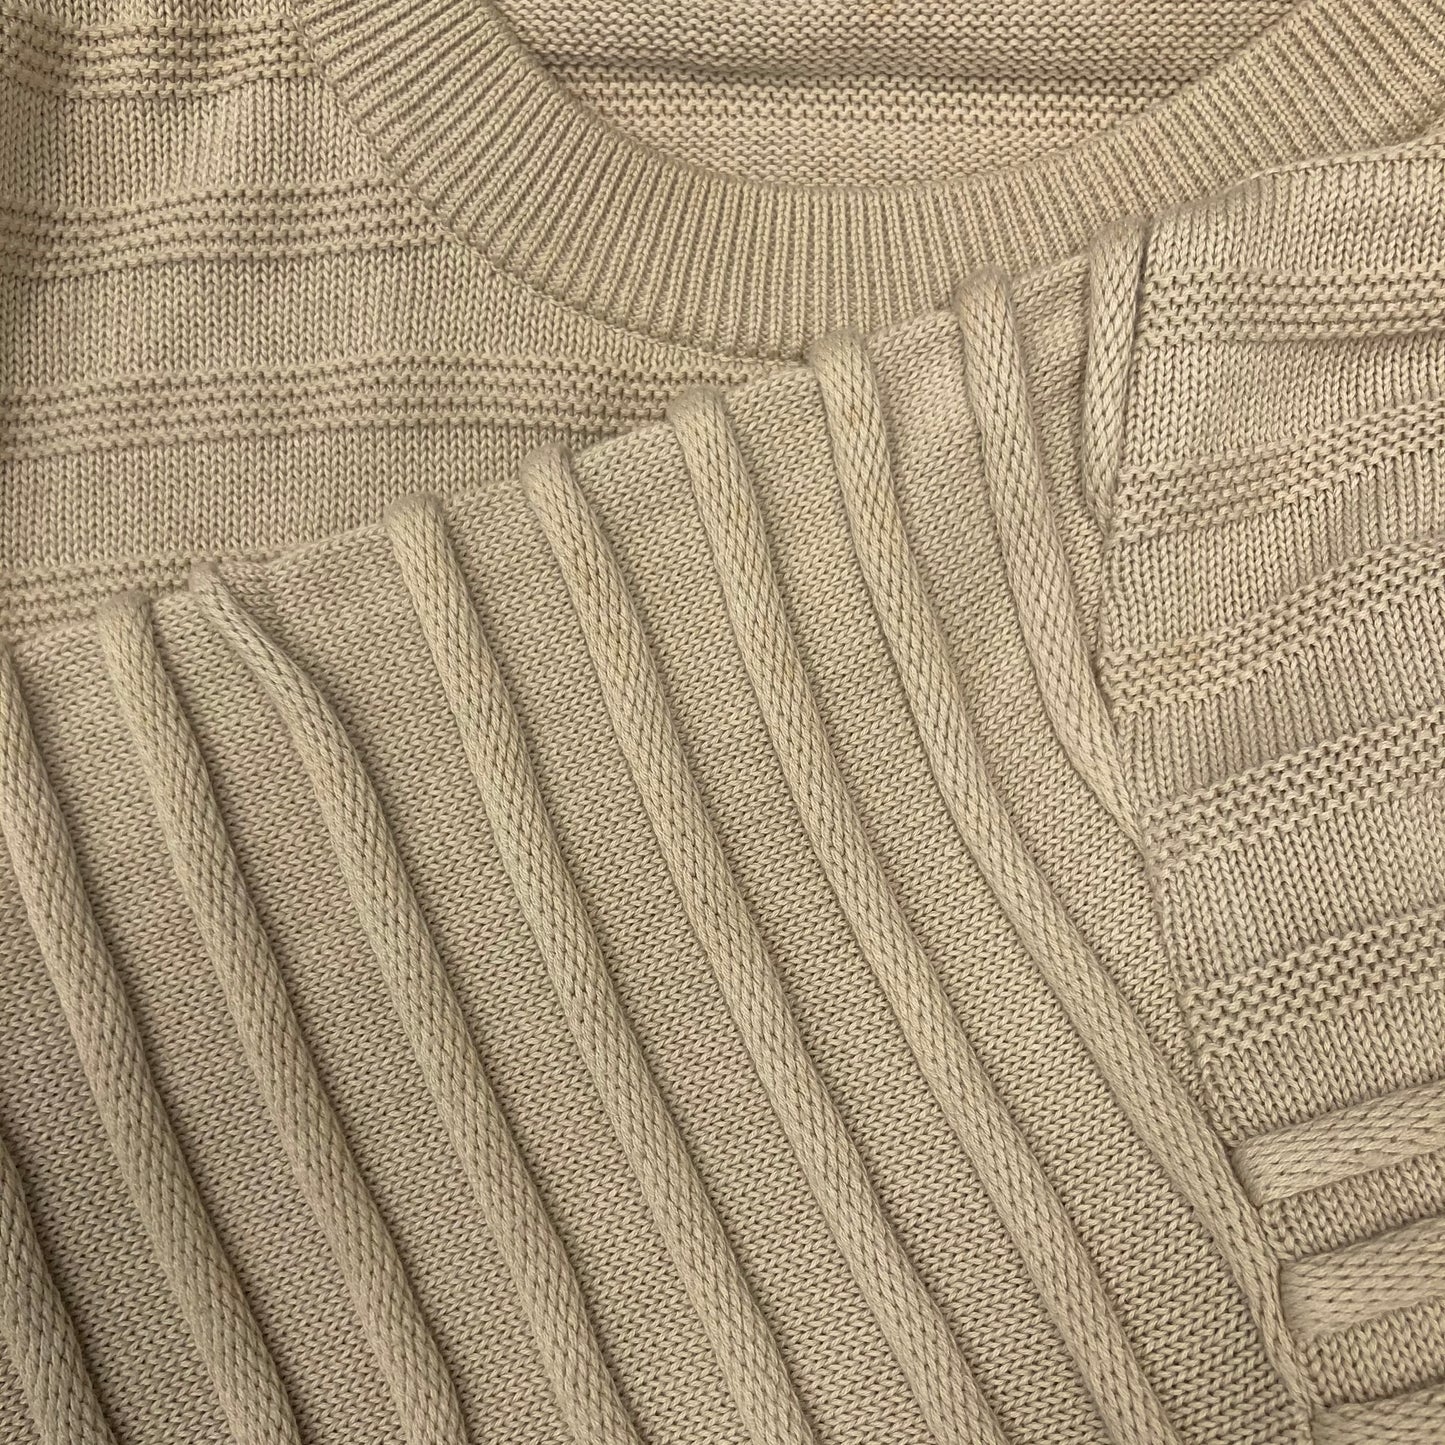 90s ISSEY MIYAKE Loose fitting knit vintage 1992ss